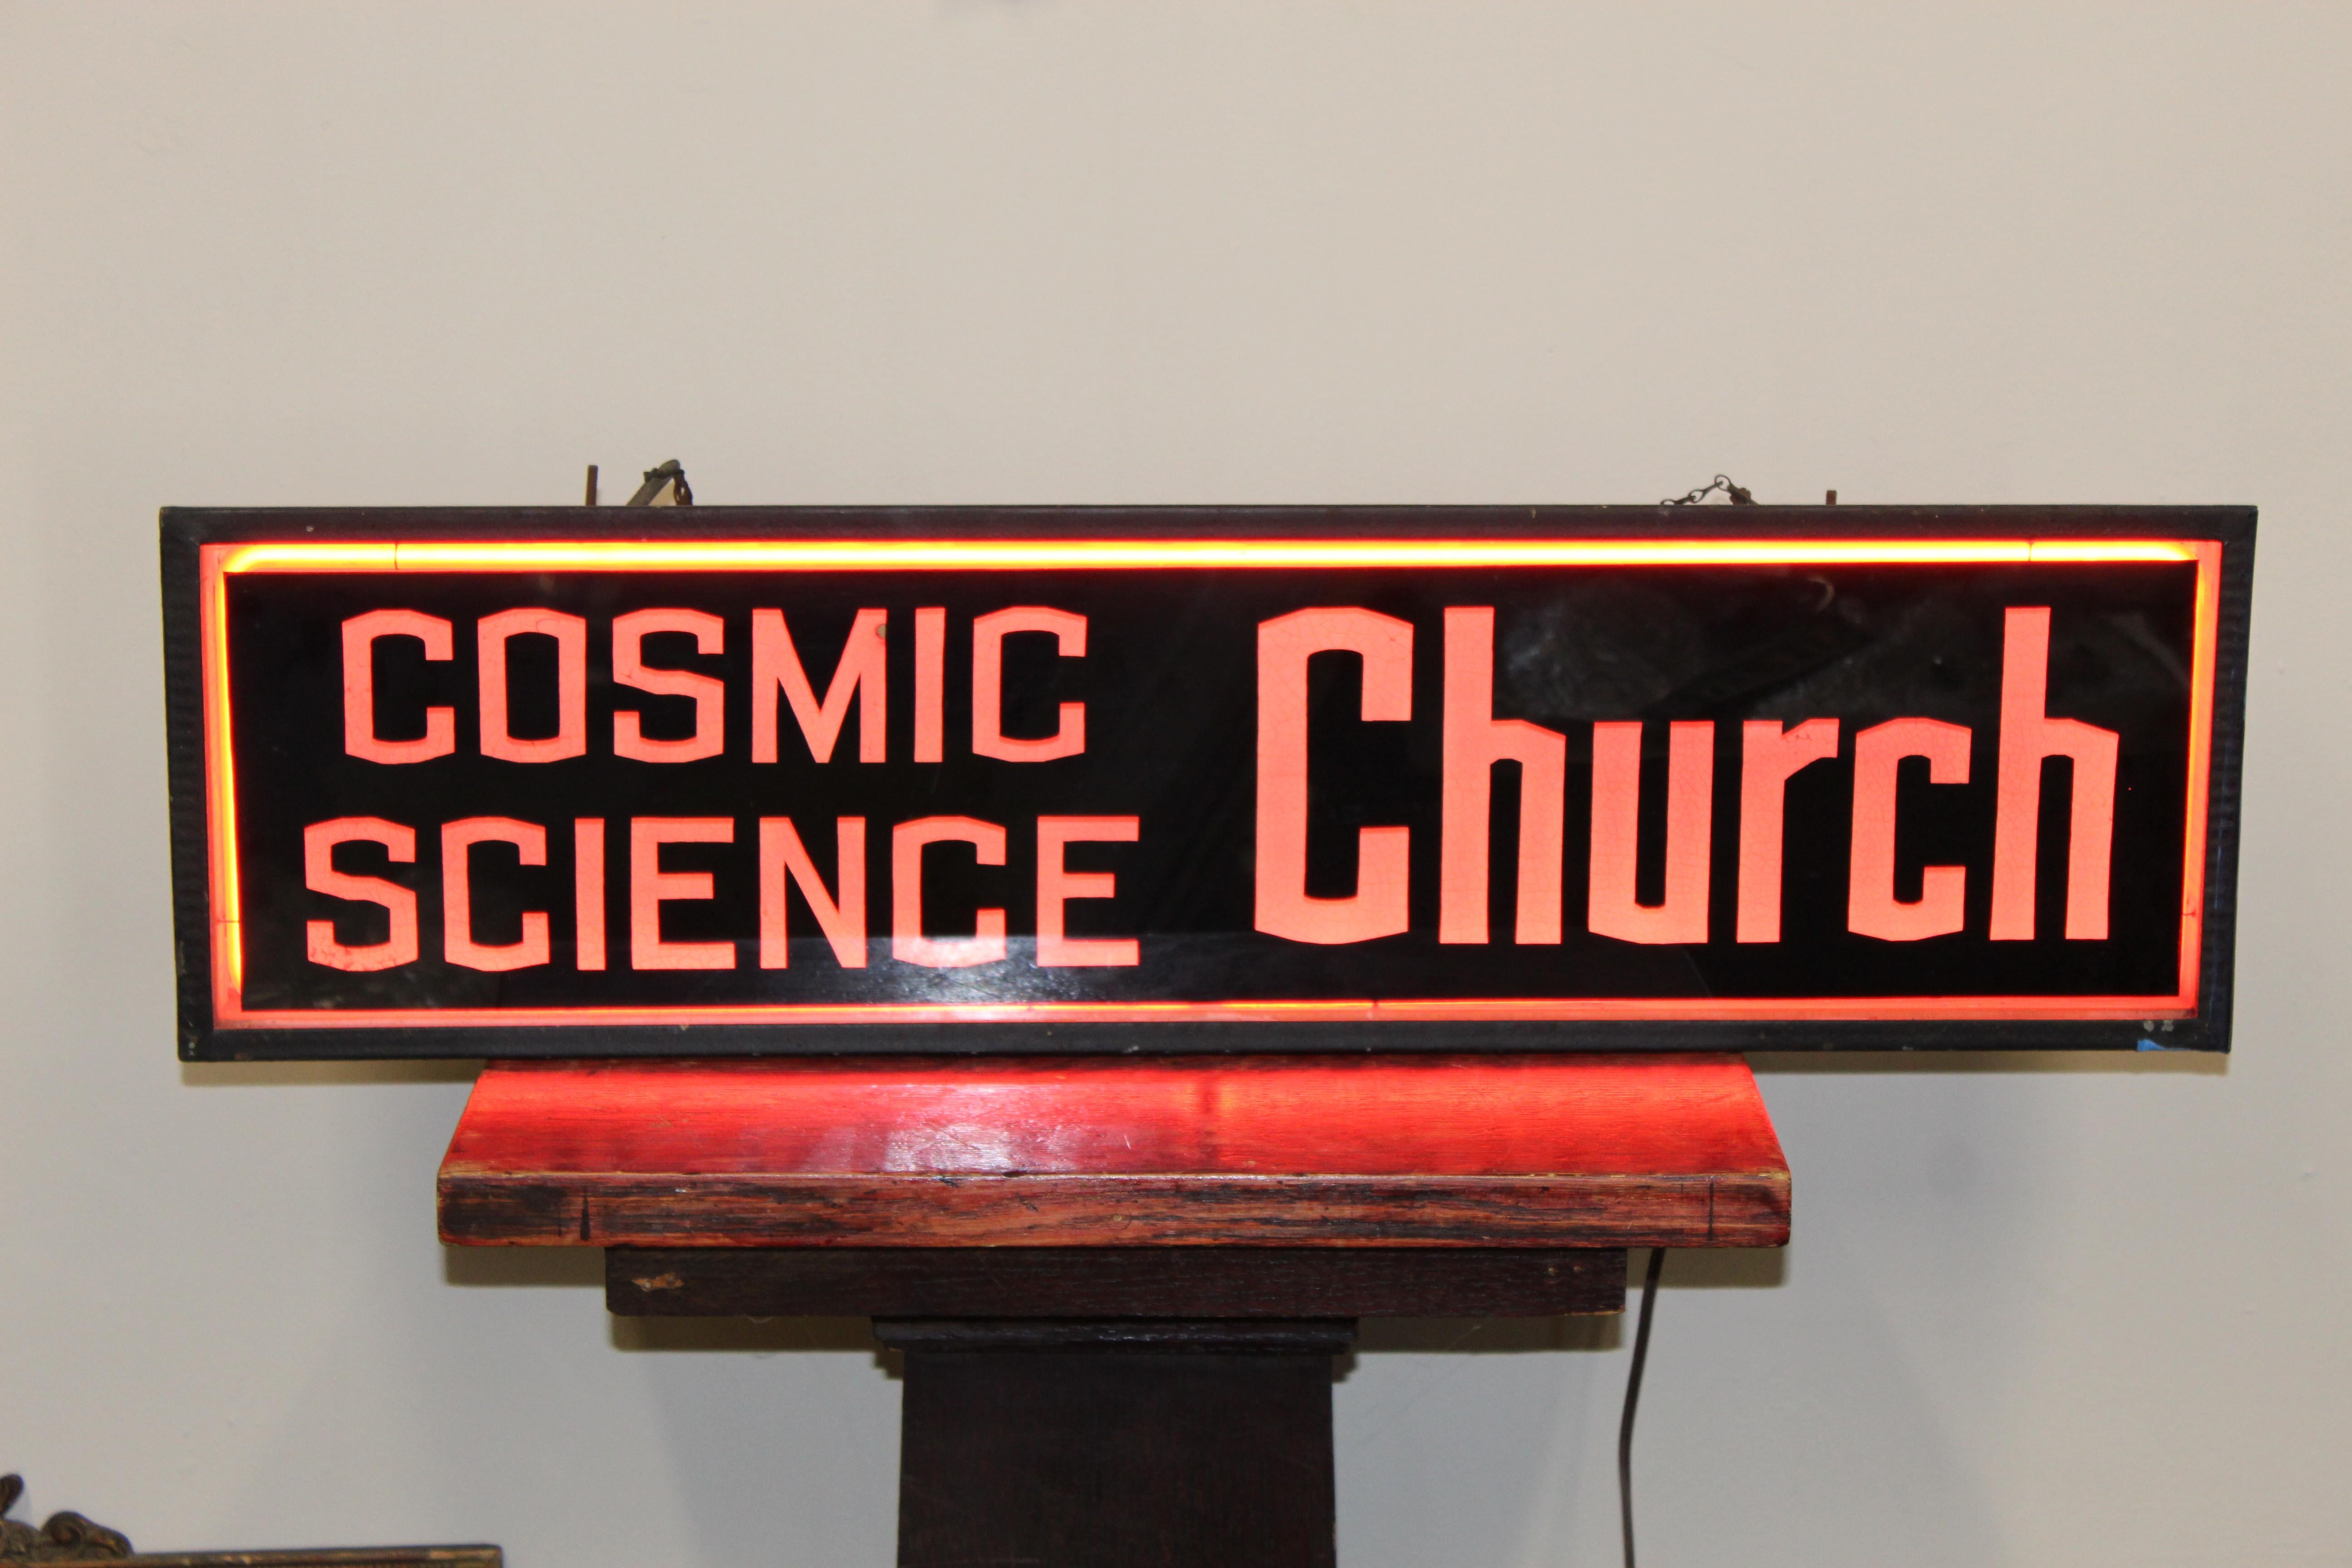 Original condition, lights up with red neon. Glass Advertising counters top sign. Right side of sign has blue tape helping frame stay intact. Some blemishes and patina on the housing.